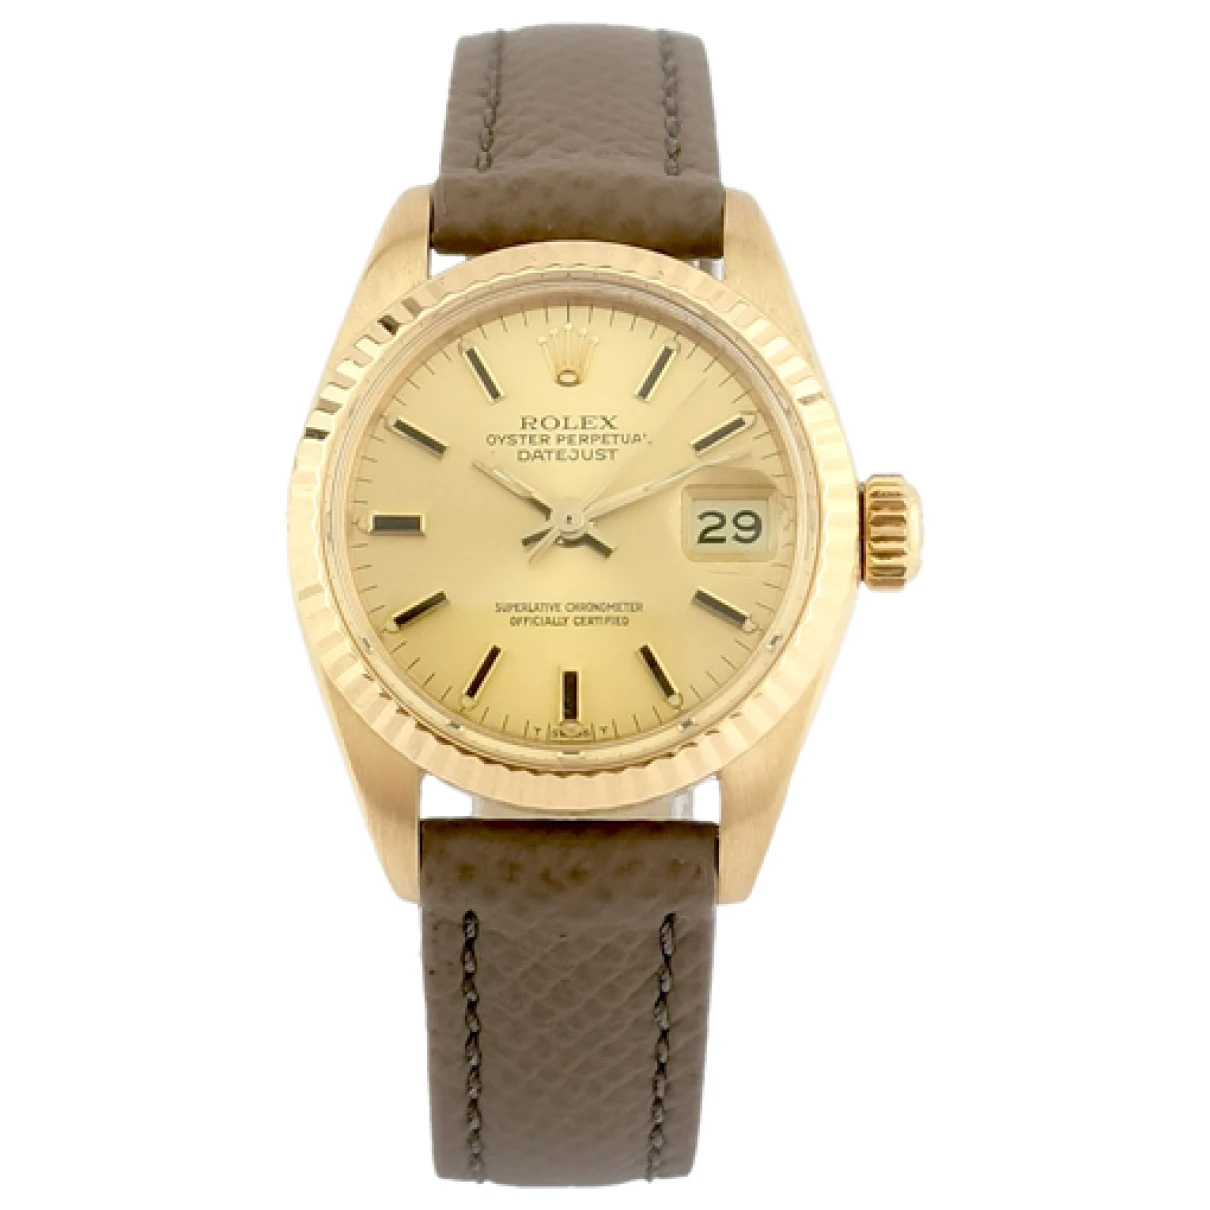 Pre-owned Rolex Lady Datejust 26mm Yellow Gold Watch